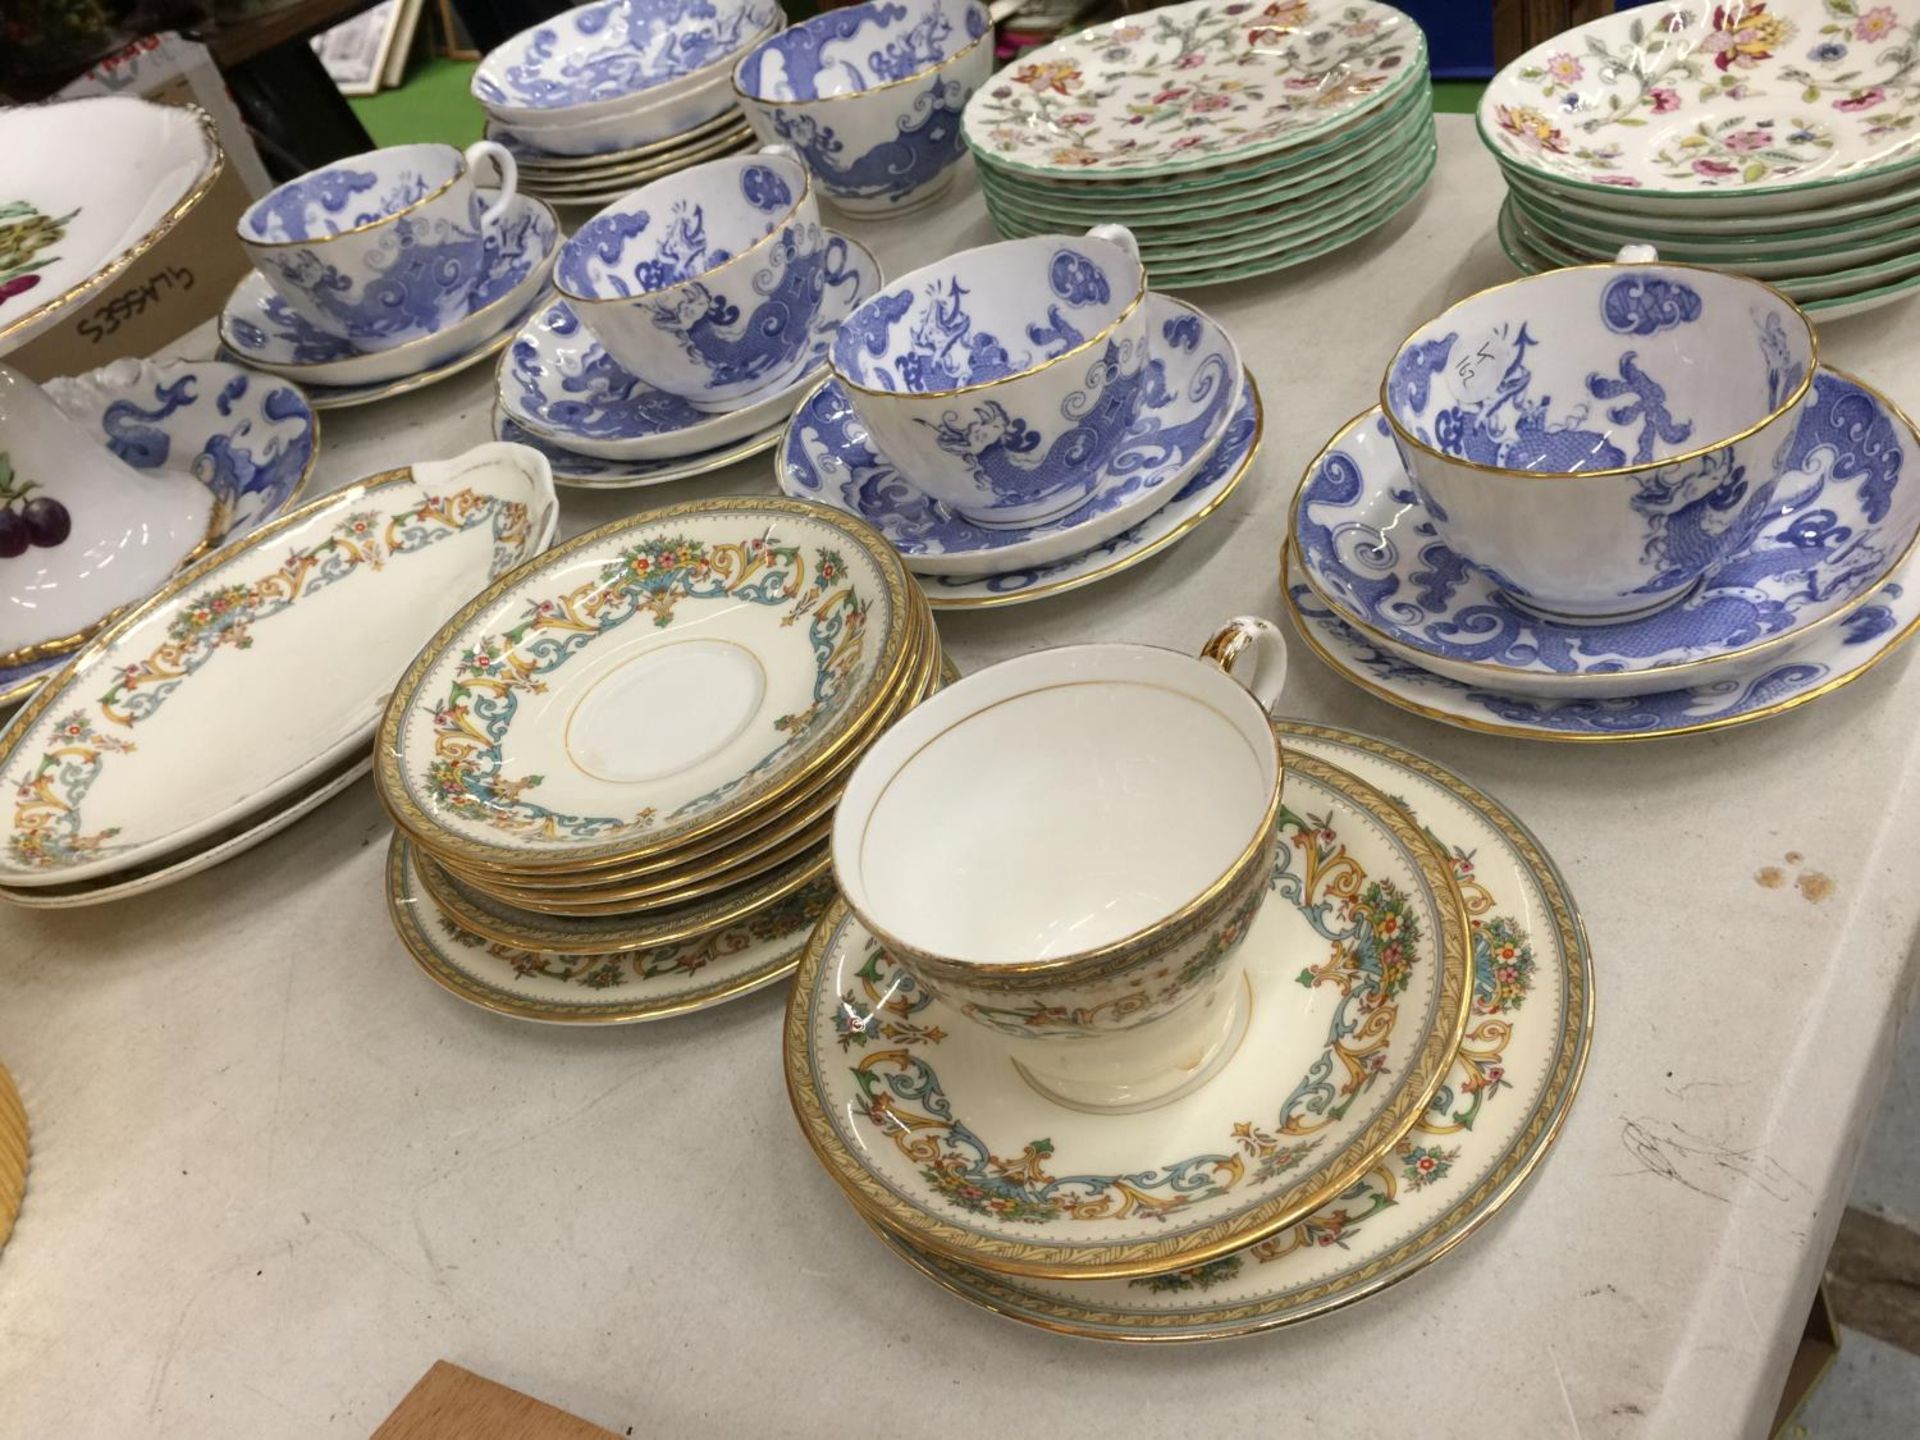 A QUANTITY OF ROYAL WORCESTER BLUE PATTERN TEACUPS, SAUCERS, PLATES, ETC, AYNSLEY 'HENLEY' PLATES - Image 2 of 6